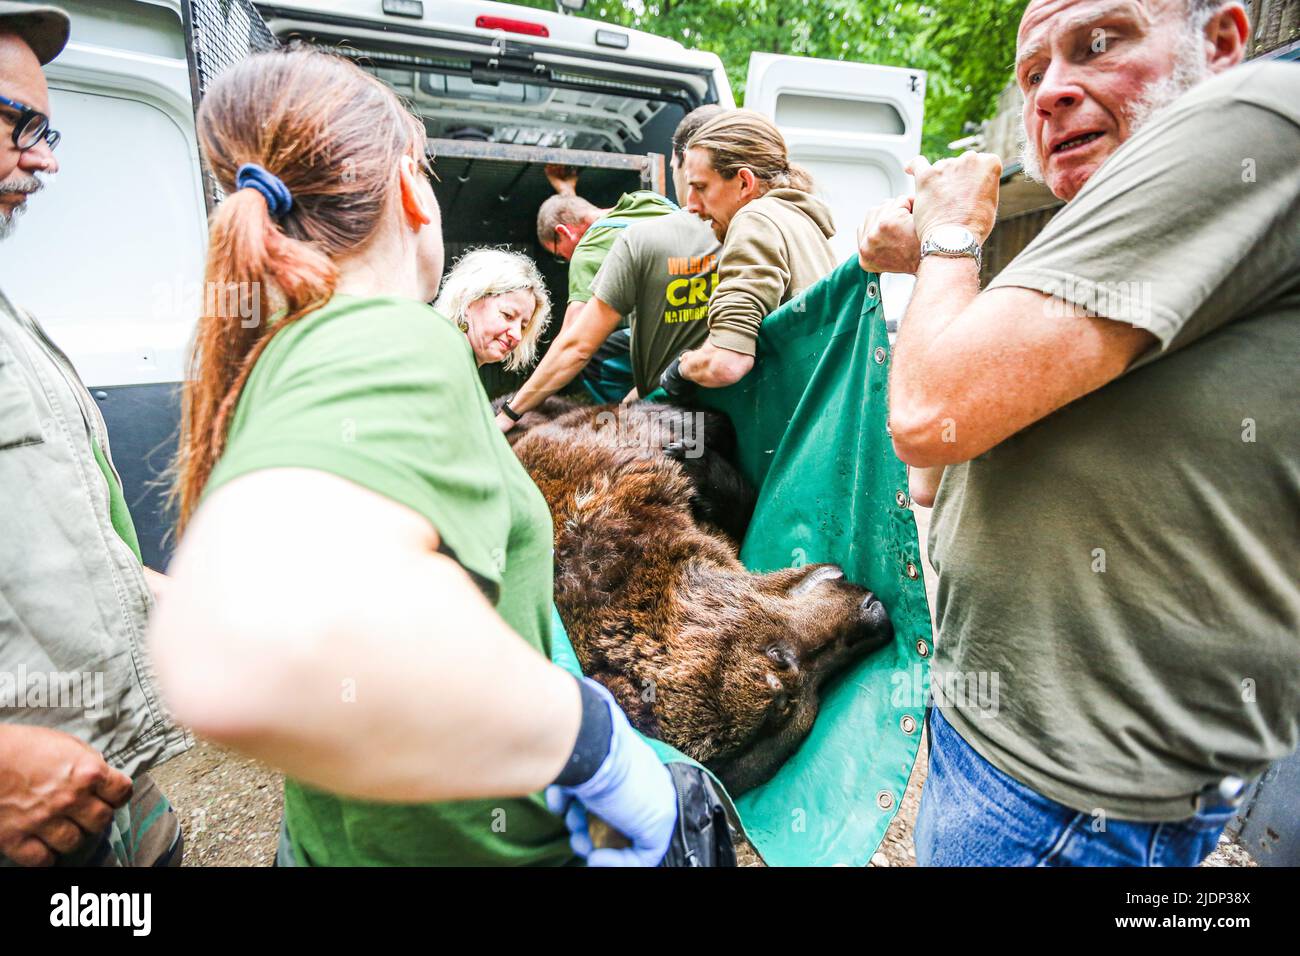 Poznan, Poznan, Poland. 22nd June, 2022. Zookeepers and head director of  the Poznan Zoo work together with Belgium animal transport and rescue,  Natuurhulpcentrum to sedate, microchip, crate and move bears that have